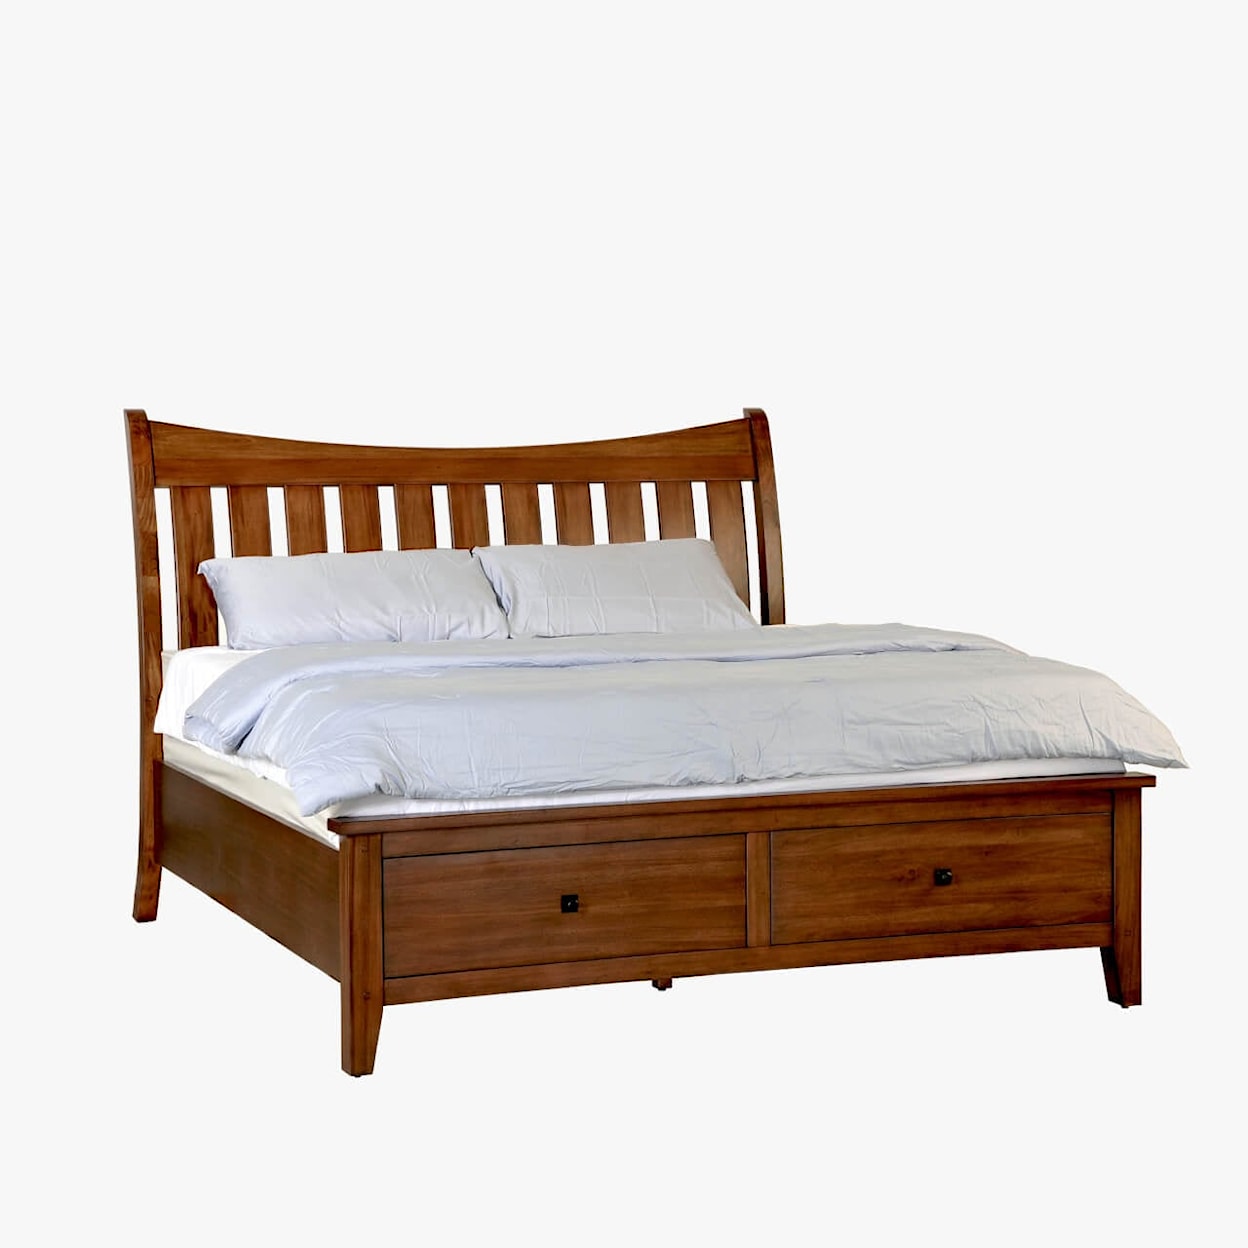 Napa Furniture Design Willow's Bend Eastern King Bed